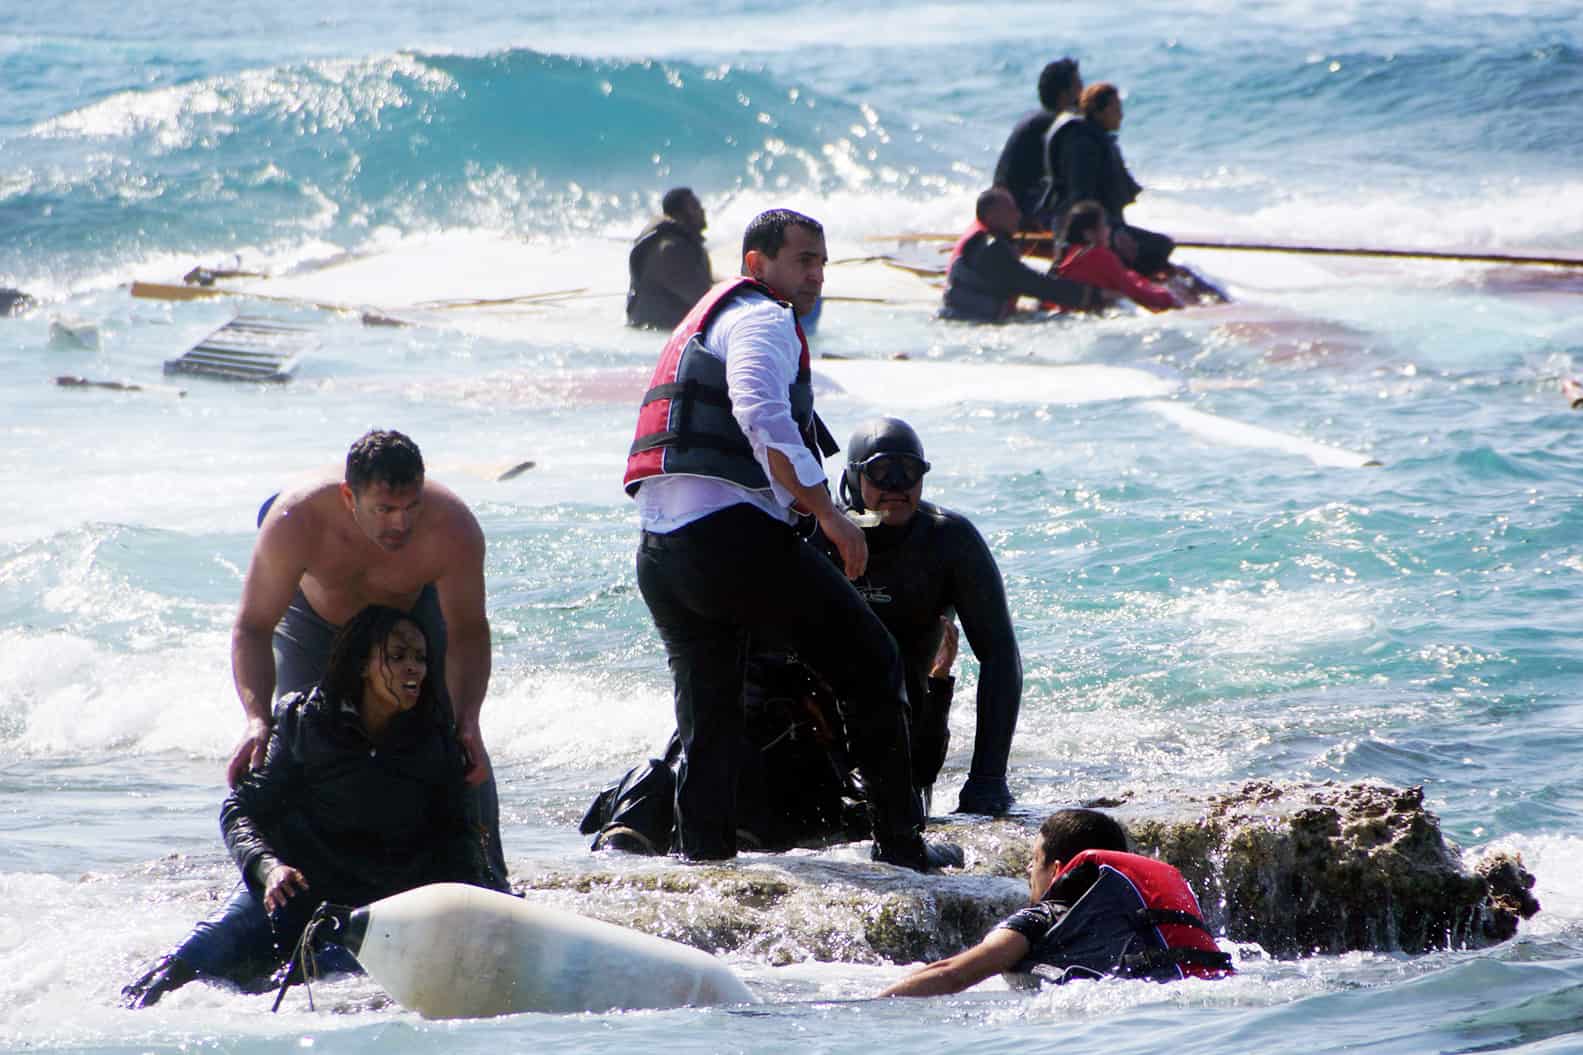 Local residents and rescue workers help a migrant woman after a boat carrying migrants sank off the island of Rhodes, southeastern Greece, on April 20, 2015.